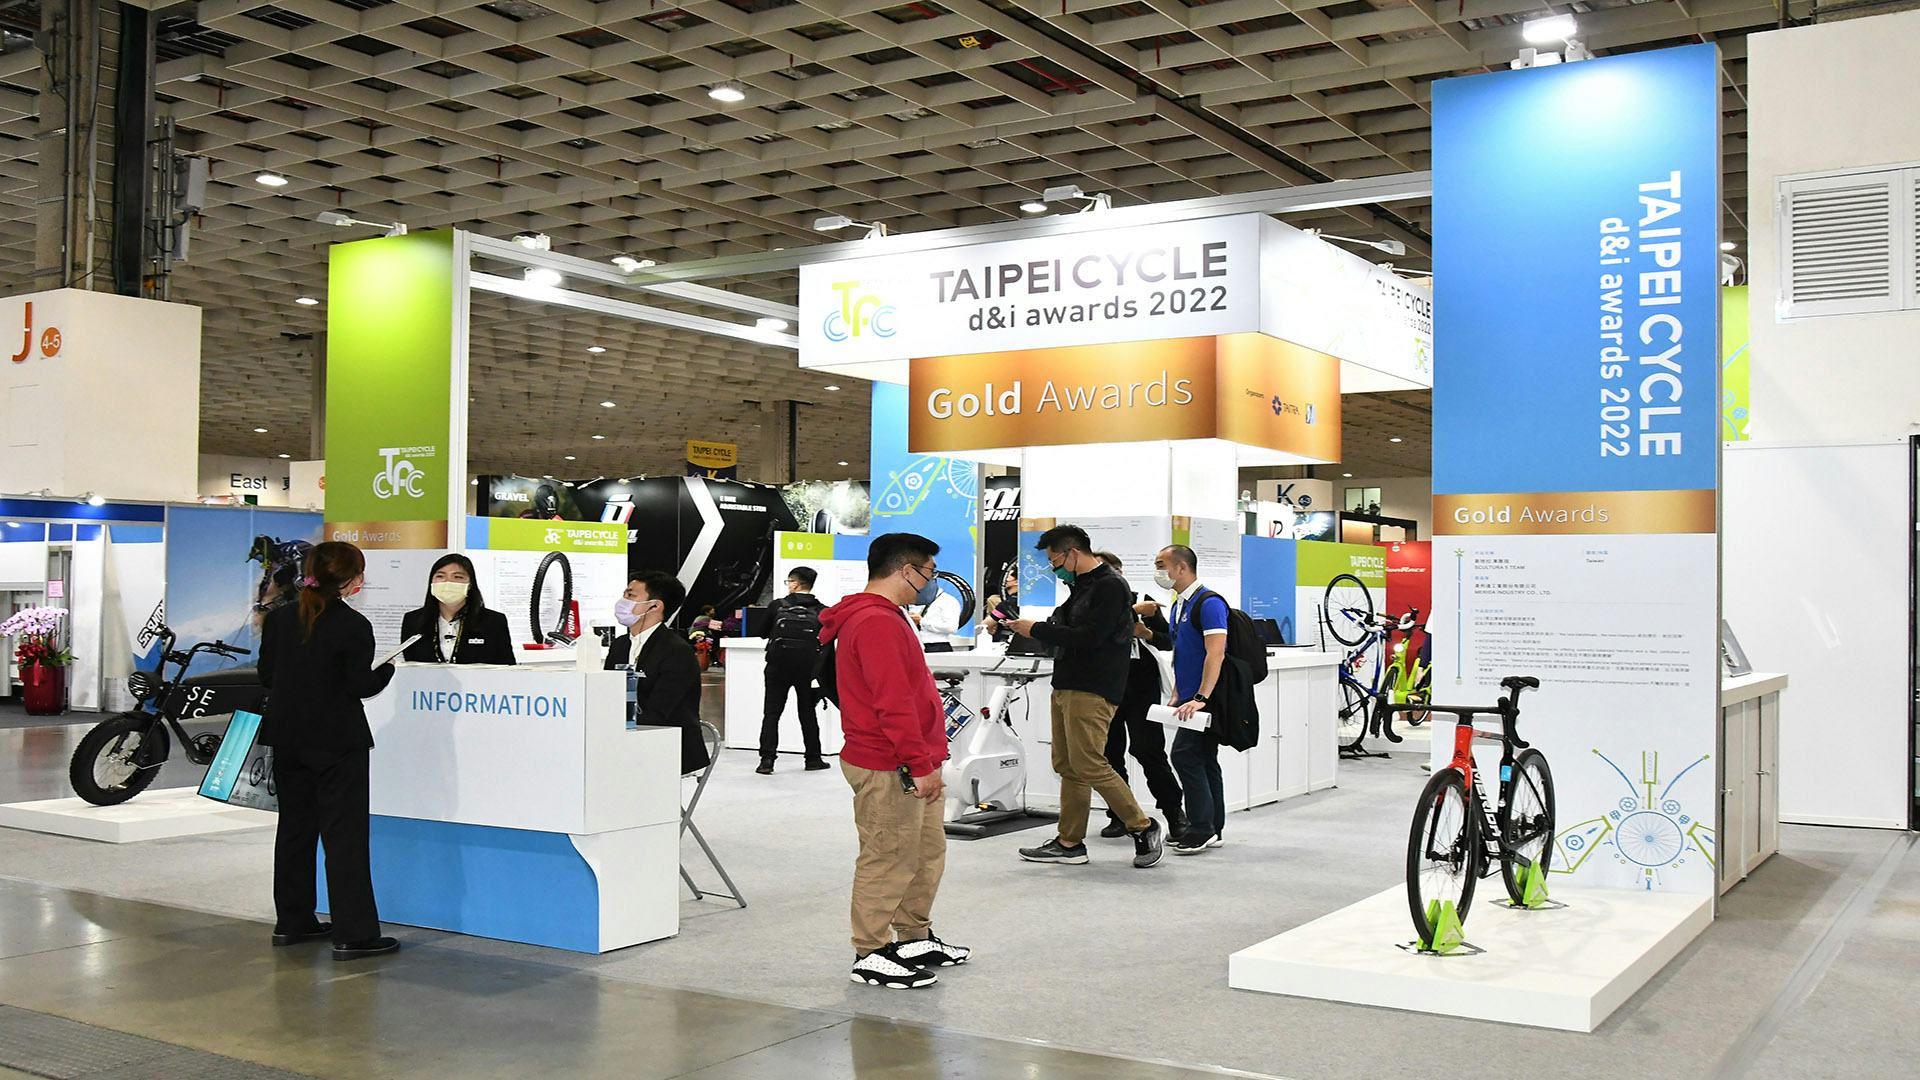 TAIPEI CYCLE d&i awards' Gold Award – Green Prize is presented for the first time only for products manufactured according to the 3R principles.